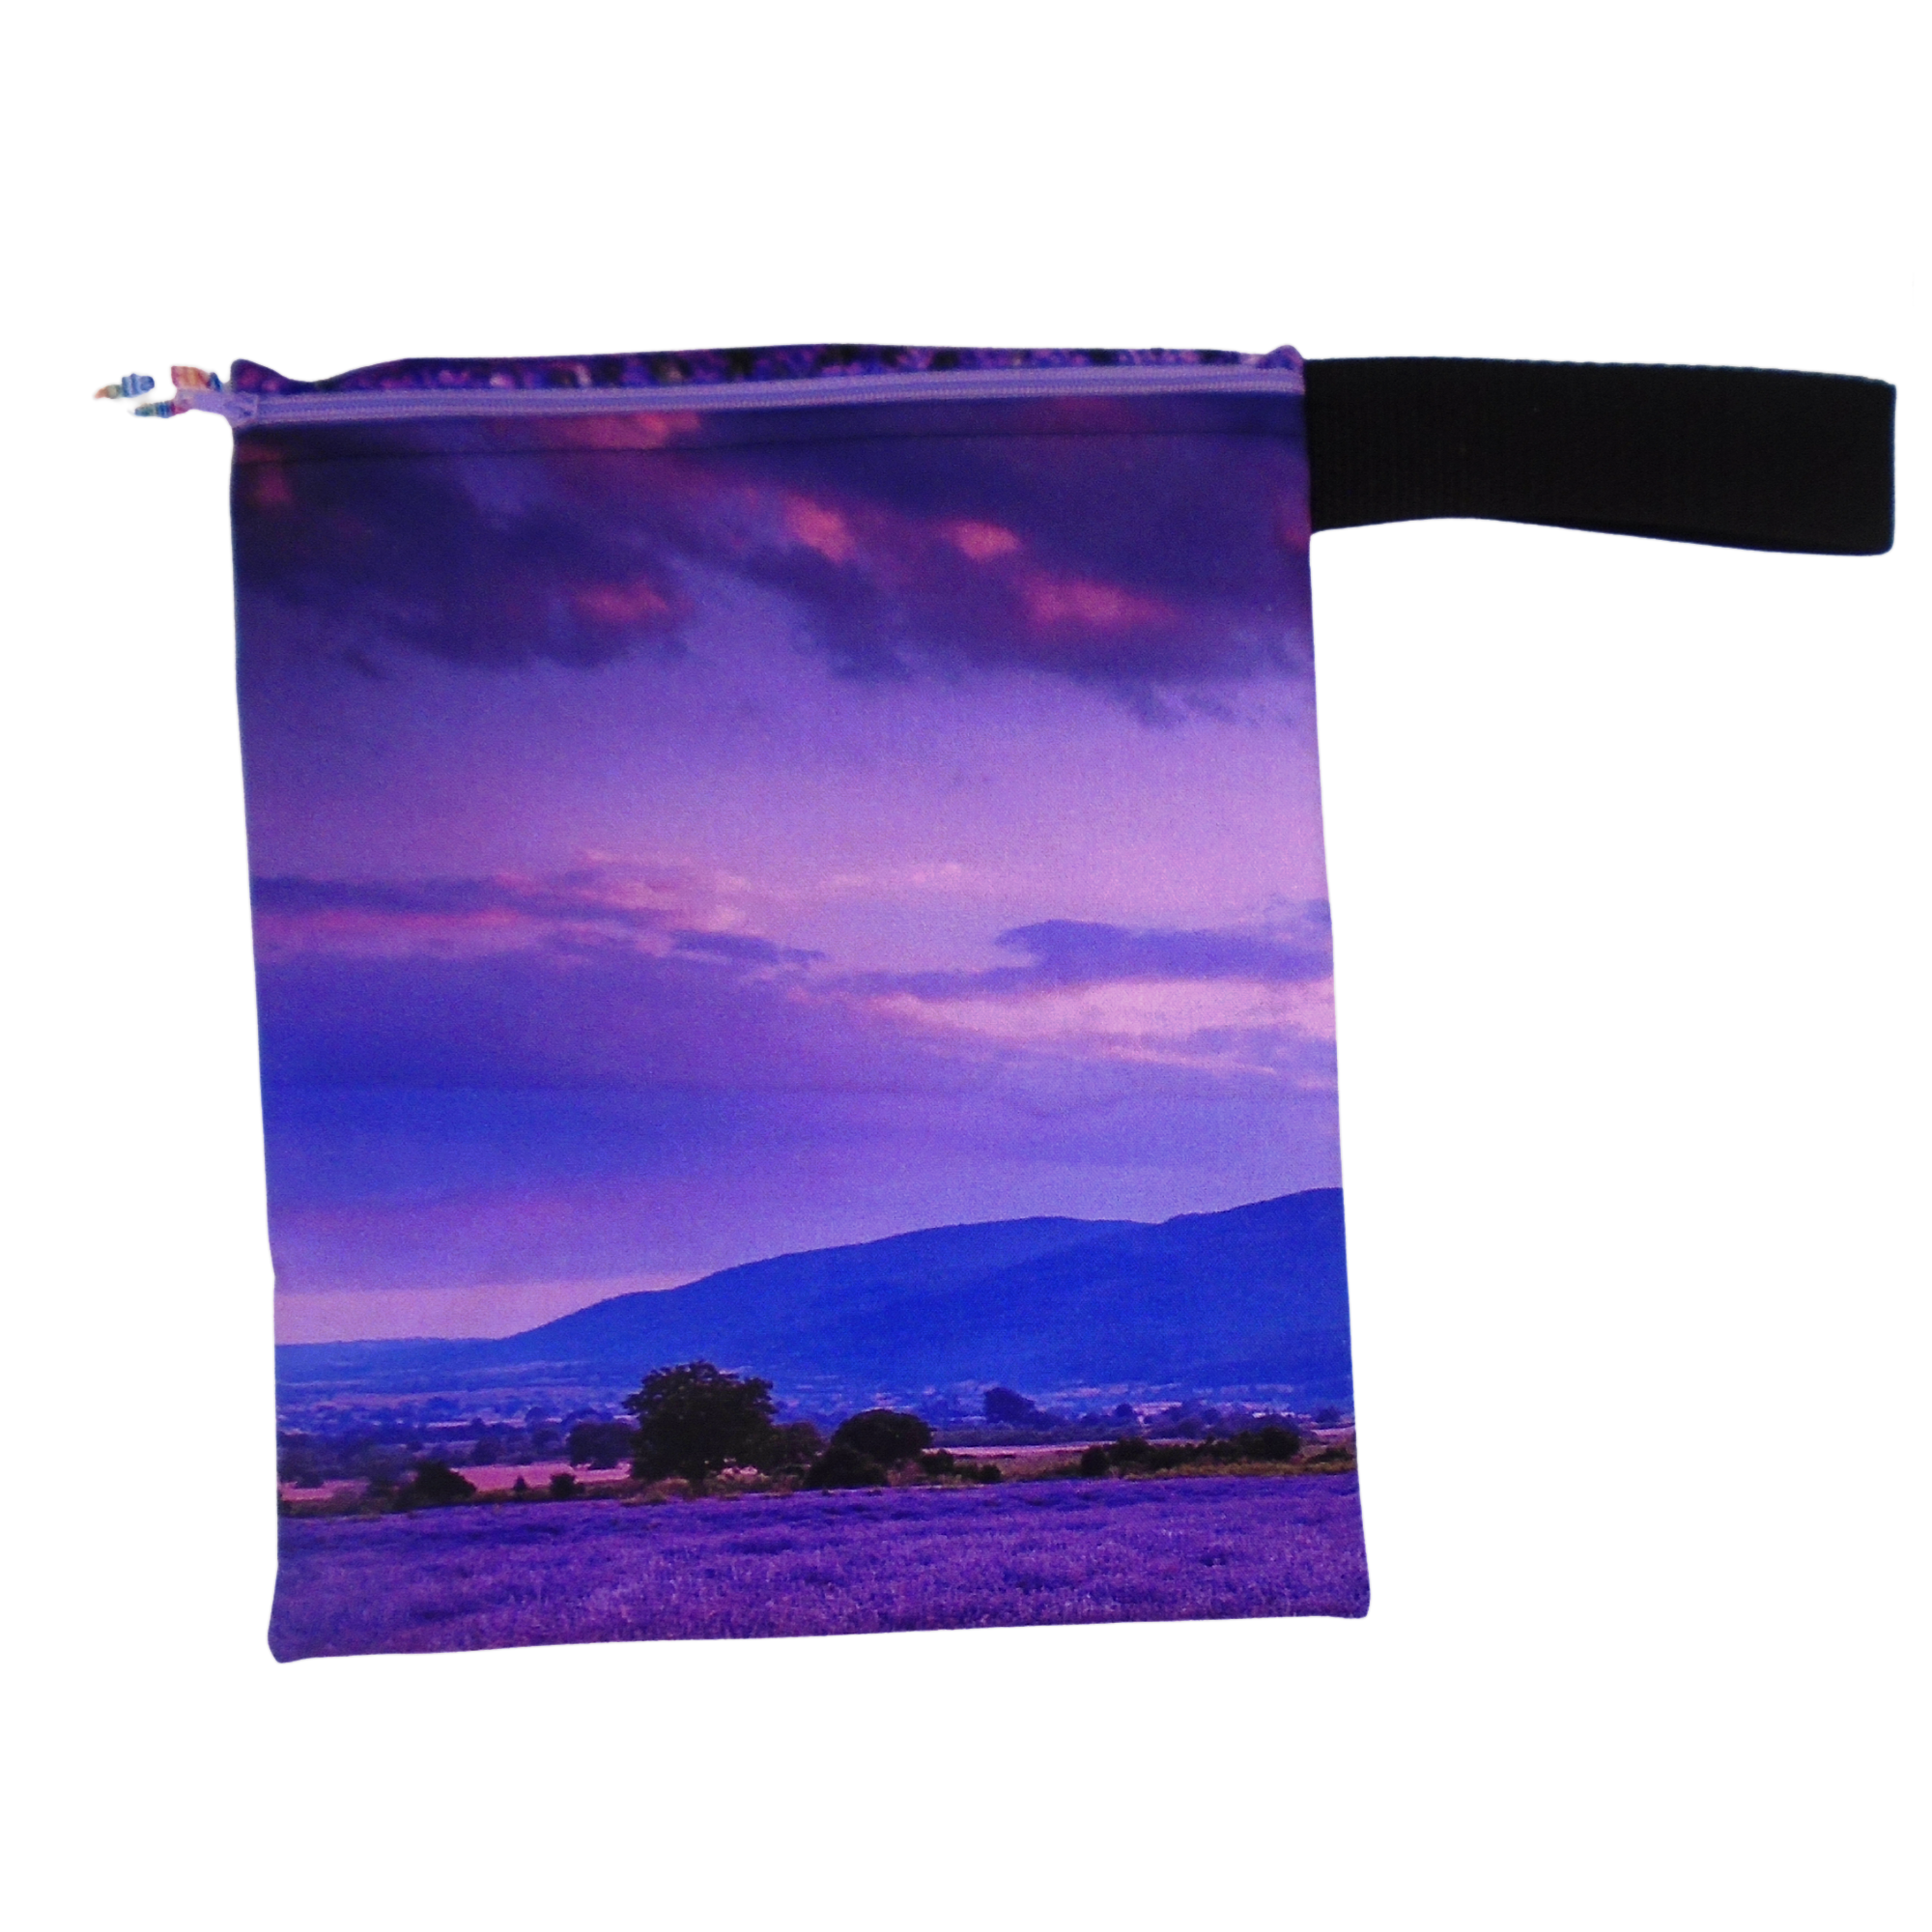 Lavender Field - Twilight-  Handy Poppins Pouch, Waterproof, Washable, Food Safe, Vegan, Lined Zip Bag With Wrist Strap